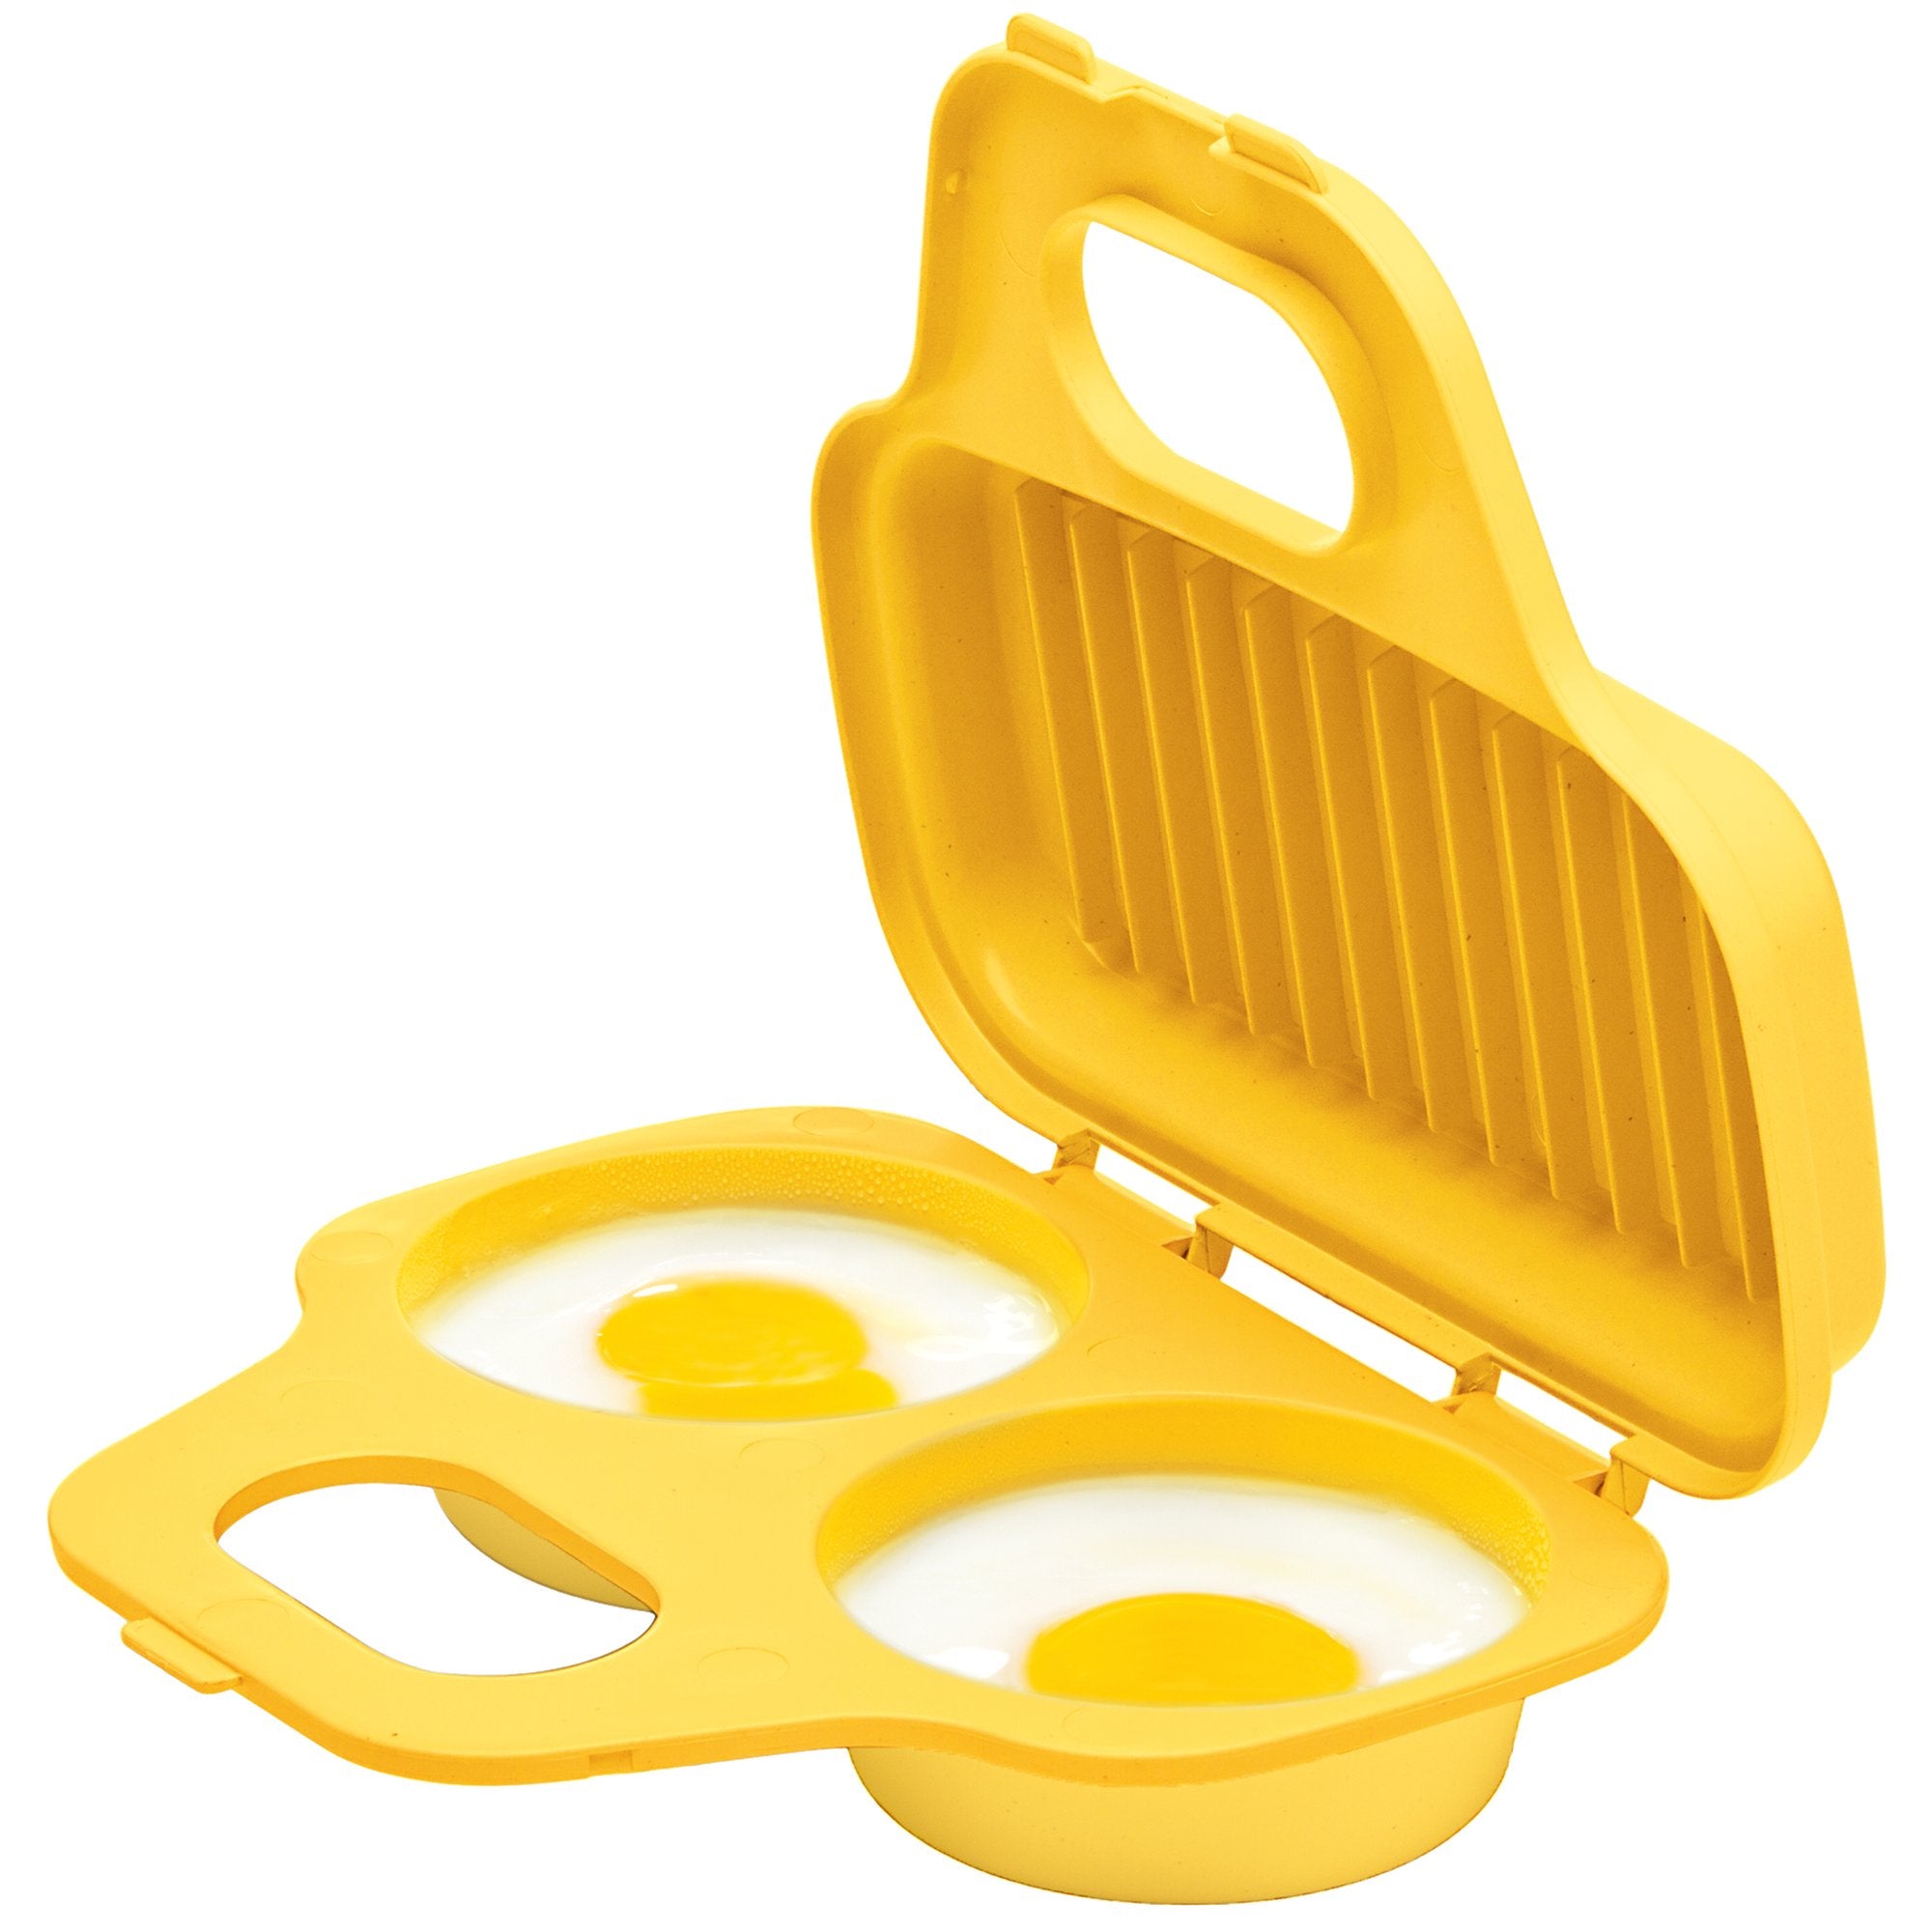 Prep Solutions by Progressive Microwave Egg Poacher, Yellow Easy-To-Use, Low-Calorie Breakfasts, Lunches And Dinner, Dishwasher Safe